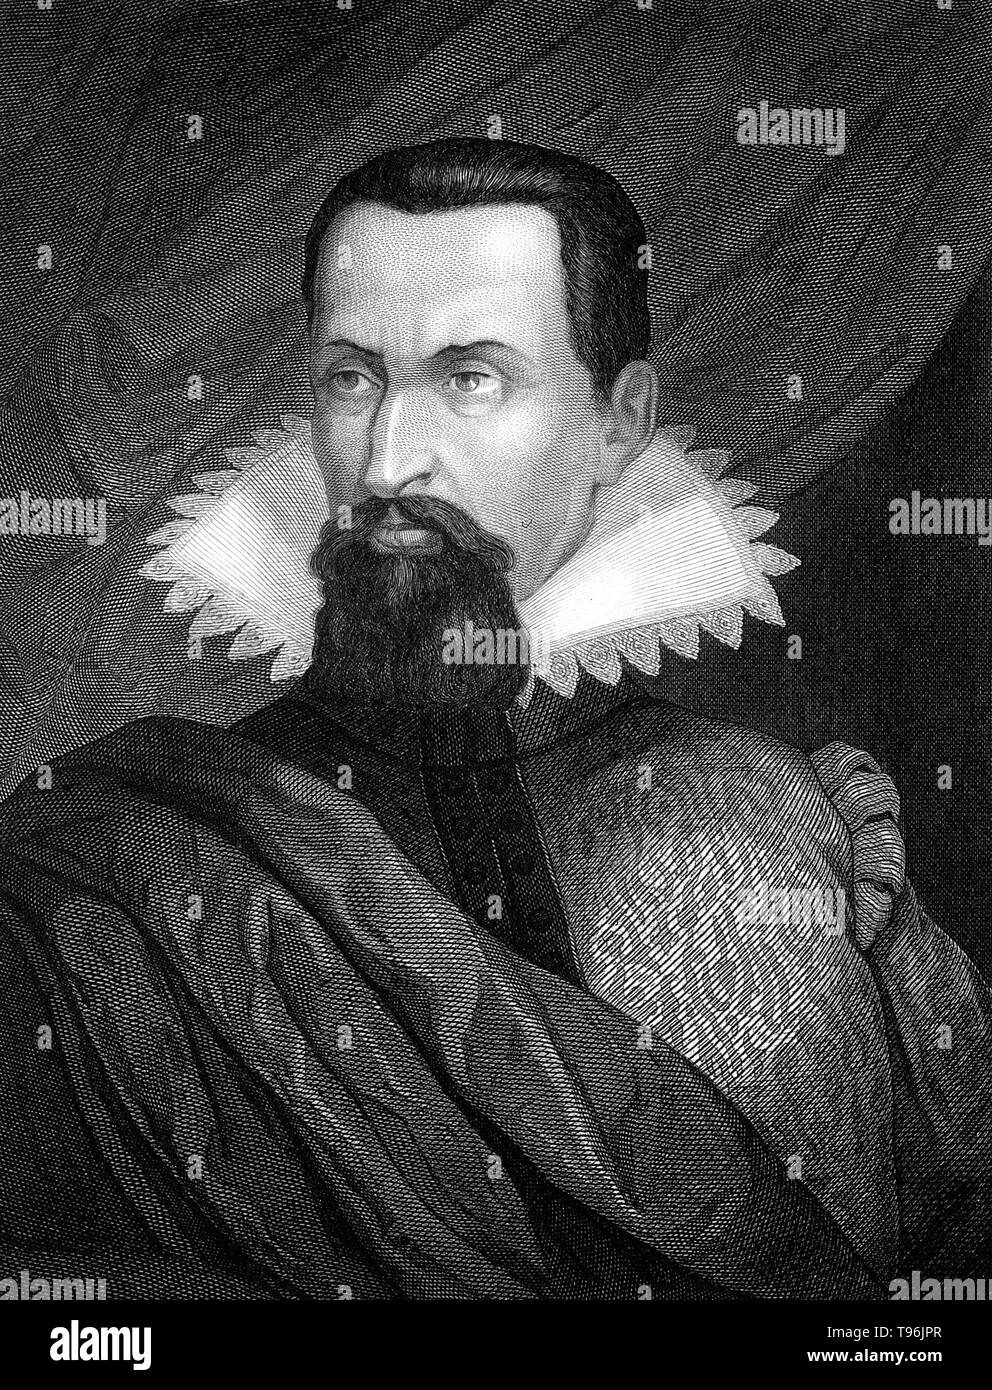 Johannes Kepler (December 27, 1571 - November 15, 1630) was a German mathematician, astronomer and astrologer. A key figure in the 17th century scientific revolution, he is best known for his works Astronomia nova, Harmonices Mundi, and Epitome Astronomiae Copernicanae. These works also provided one of the foundations for Isaac Newton's theory of universal gravitation. Kepler devised the three fundamental laws of planetary motion. Stock Photo